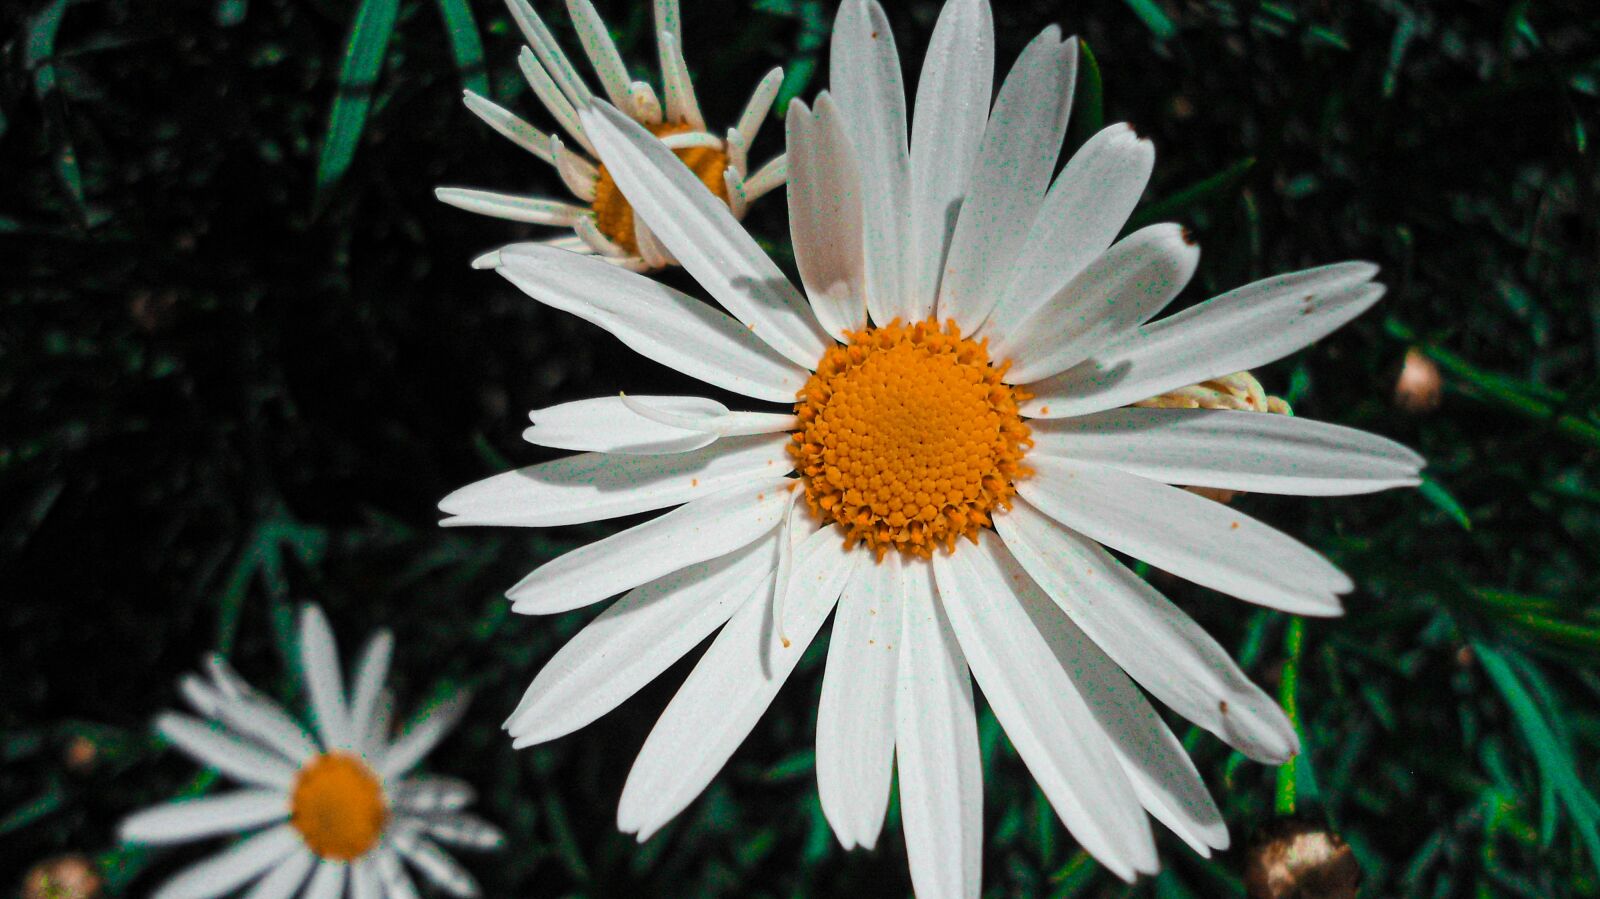 Sony Cyber-shot DSC-W510 sample photo. Daisies, white daisies, bloom photography